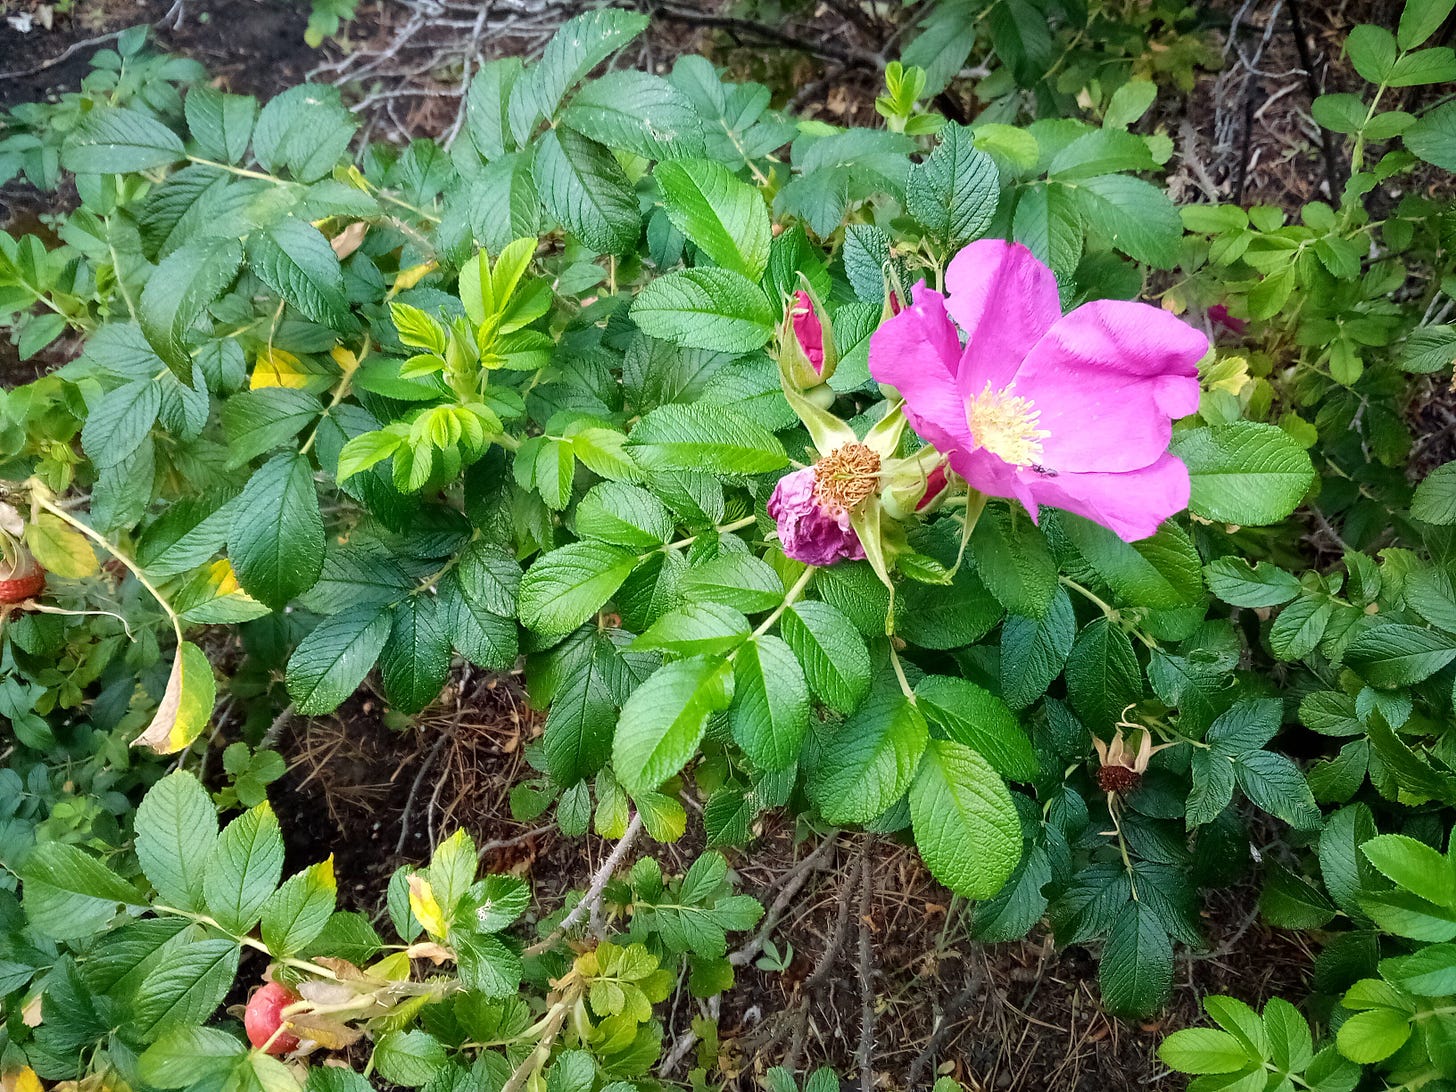 Pink wild rose blooming on a heat-stressed plant